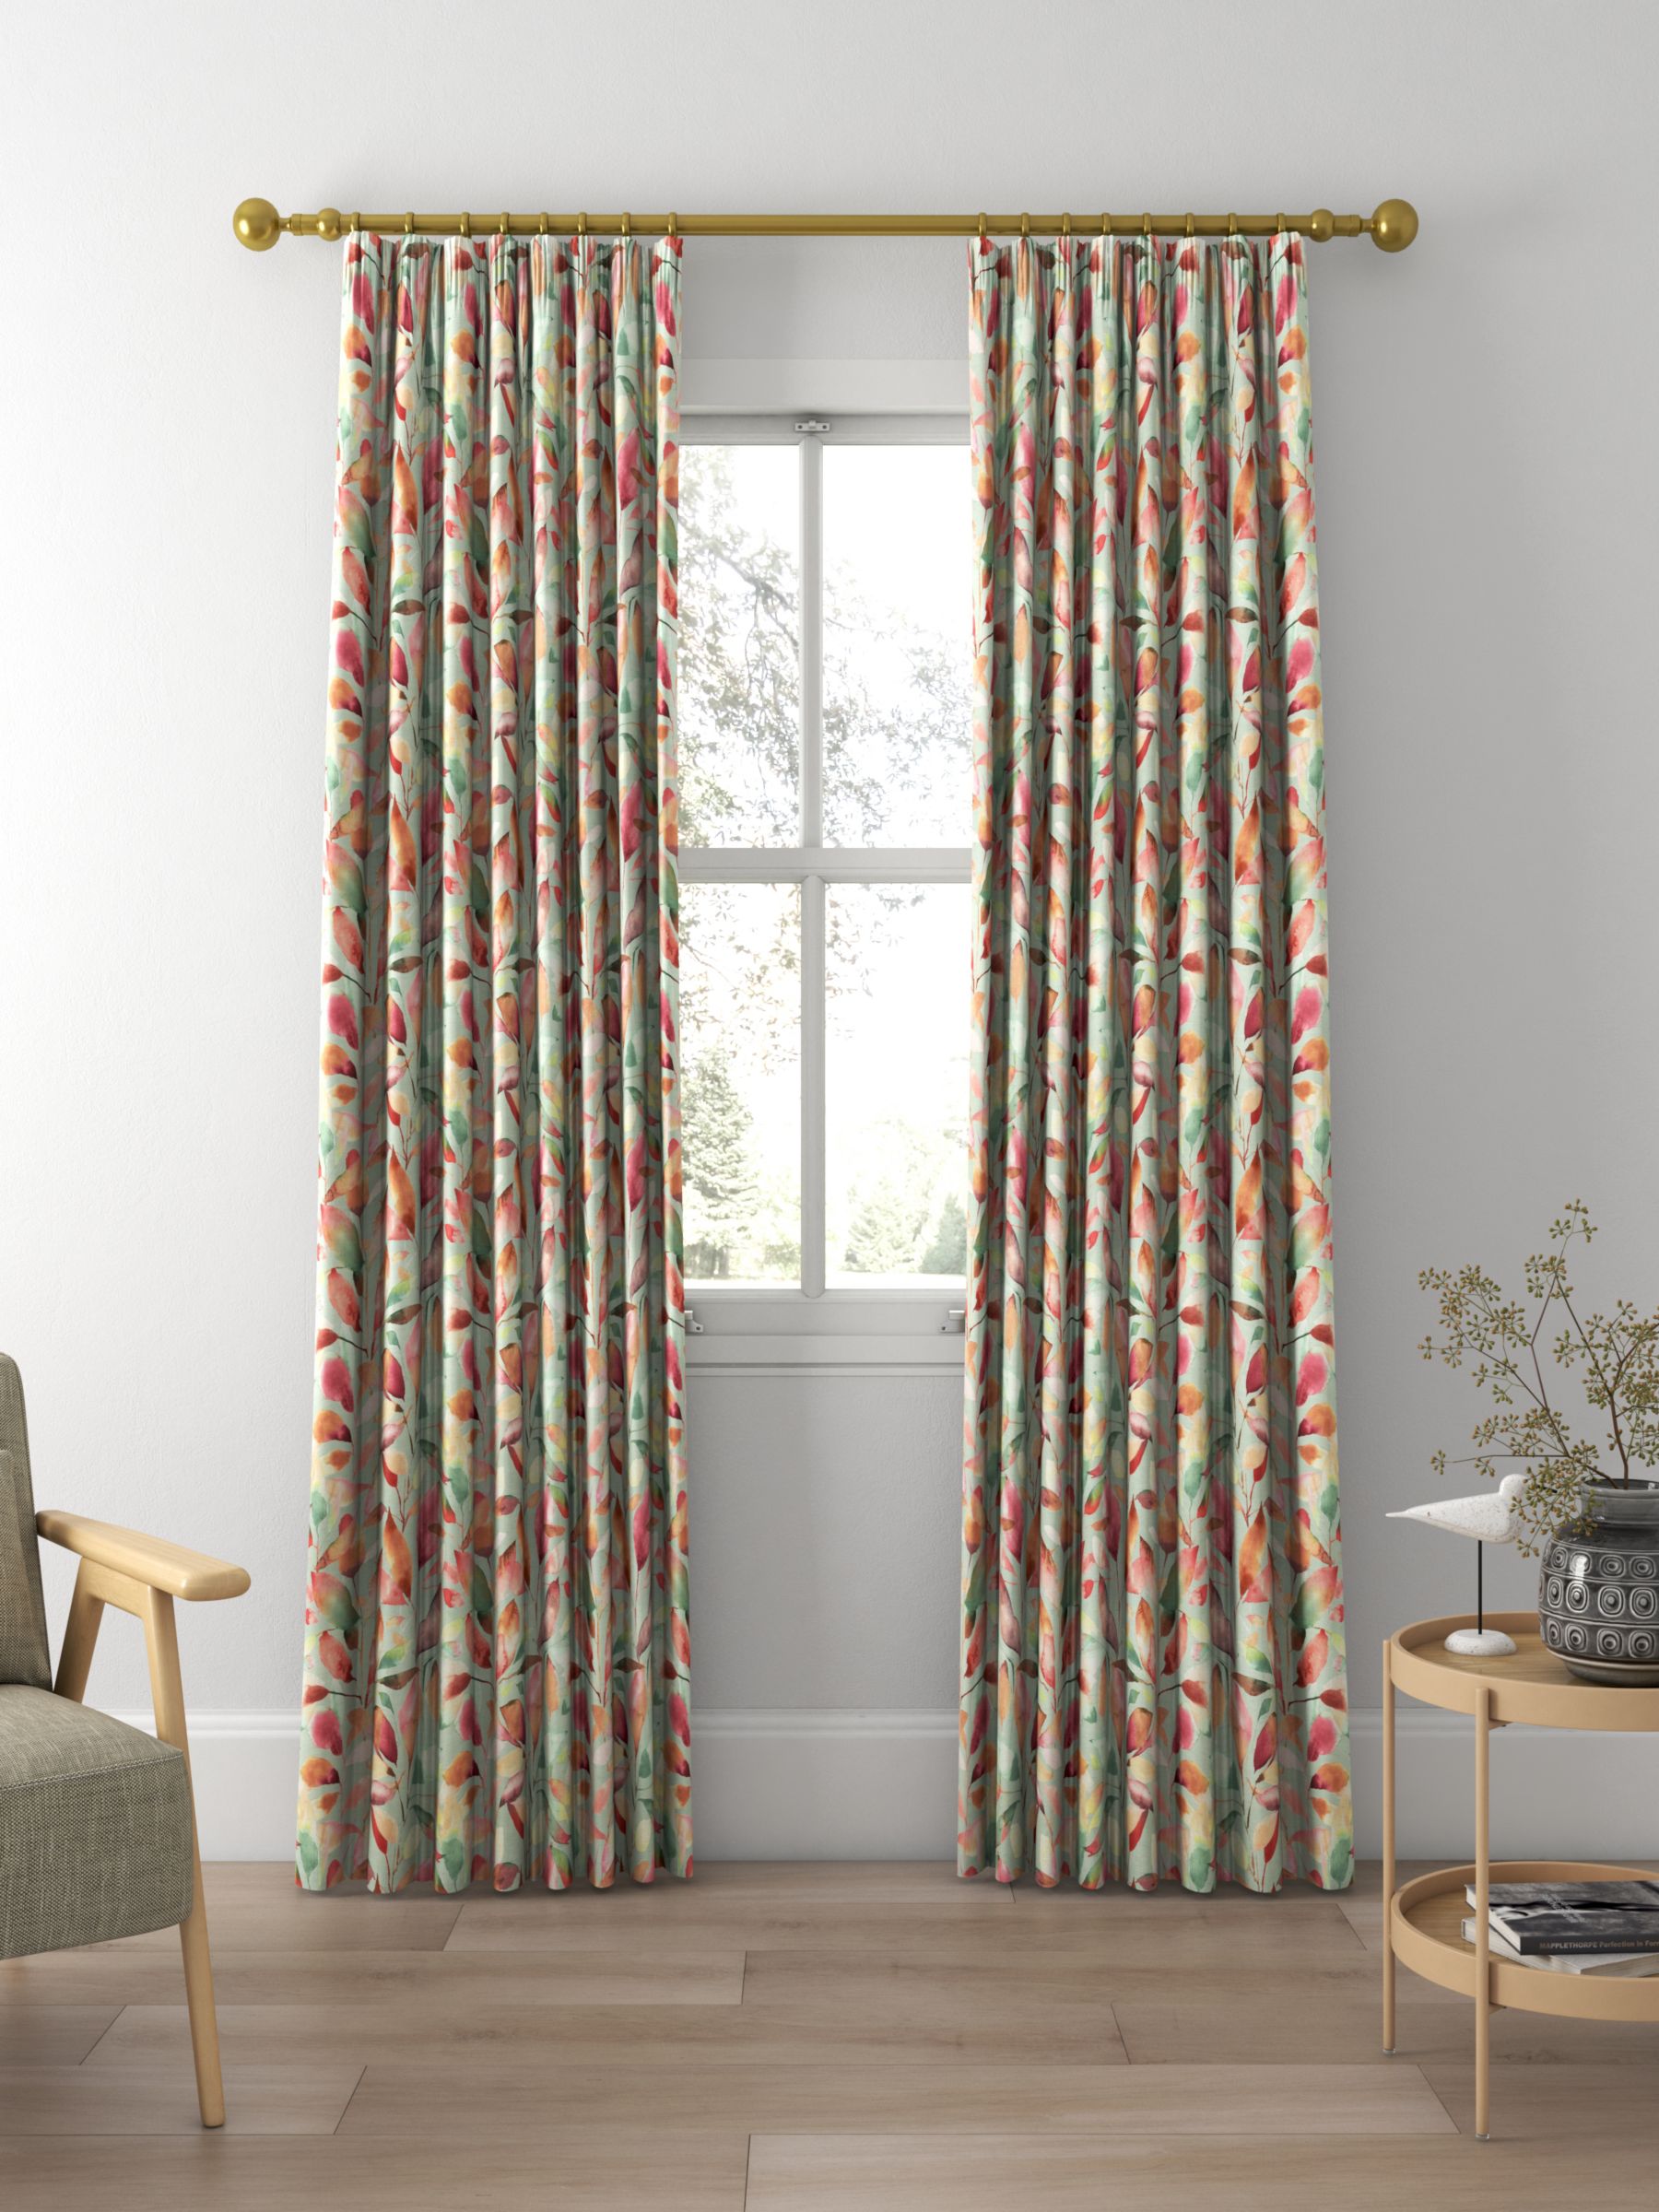 Voyage Brympton Made to Measure Curtains, Russet